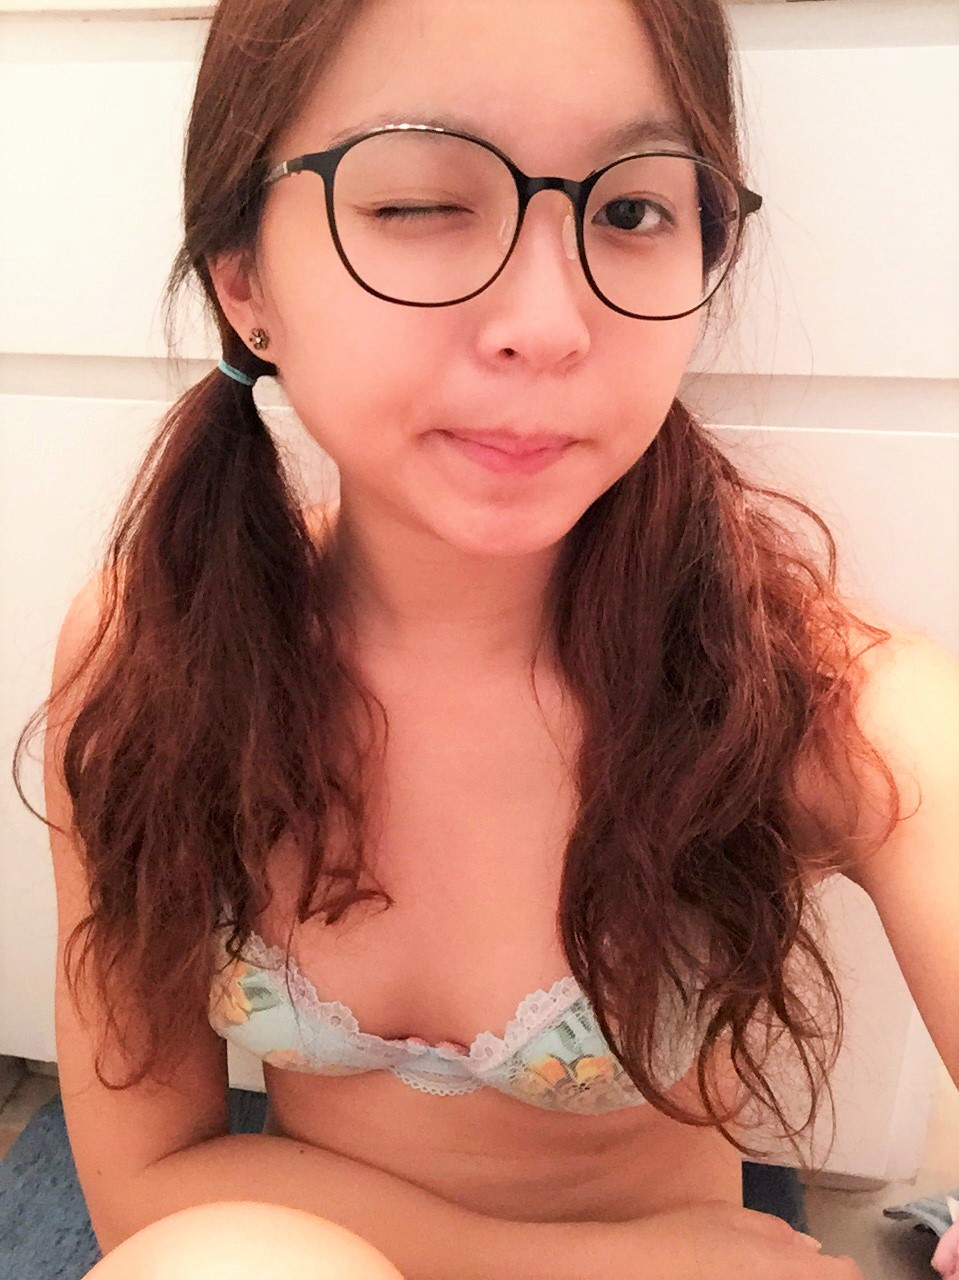 Petite Asian Teen Takes Nude Selfies - HT4jtBT Porn picture photo